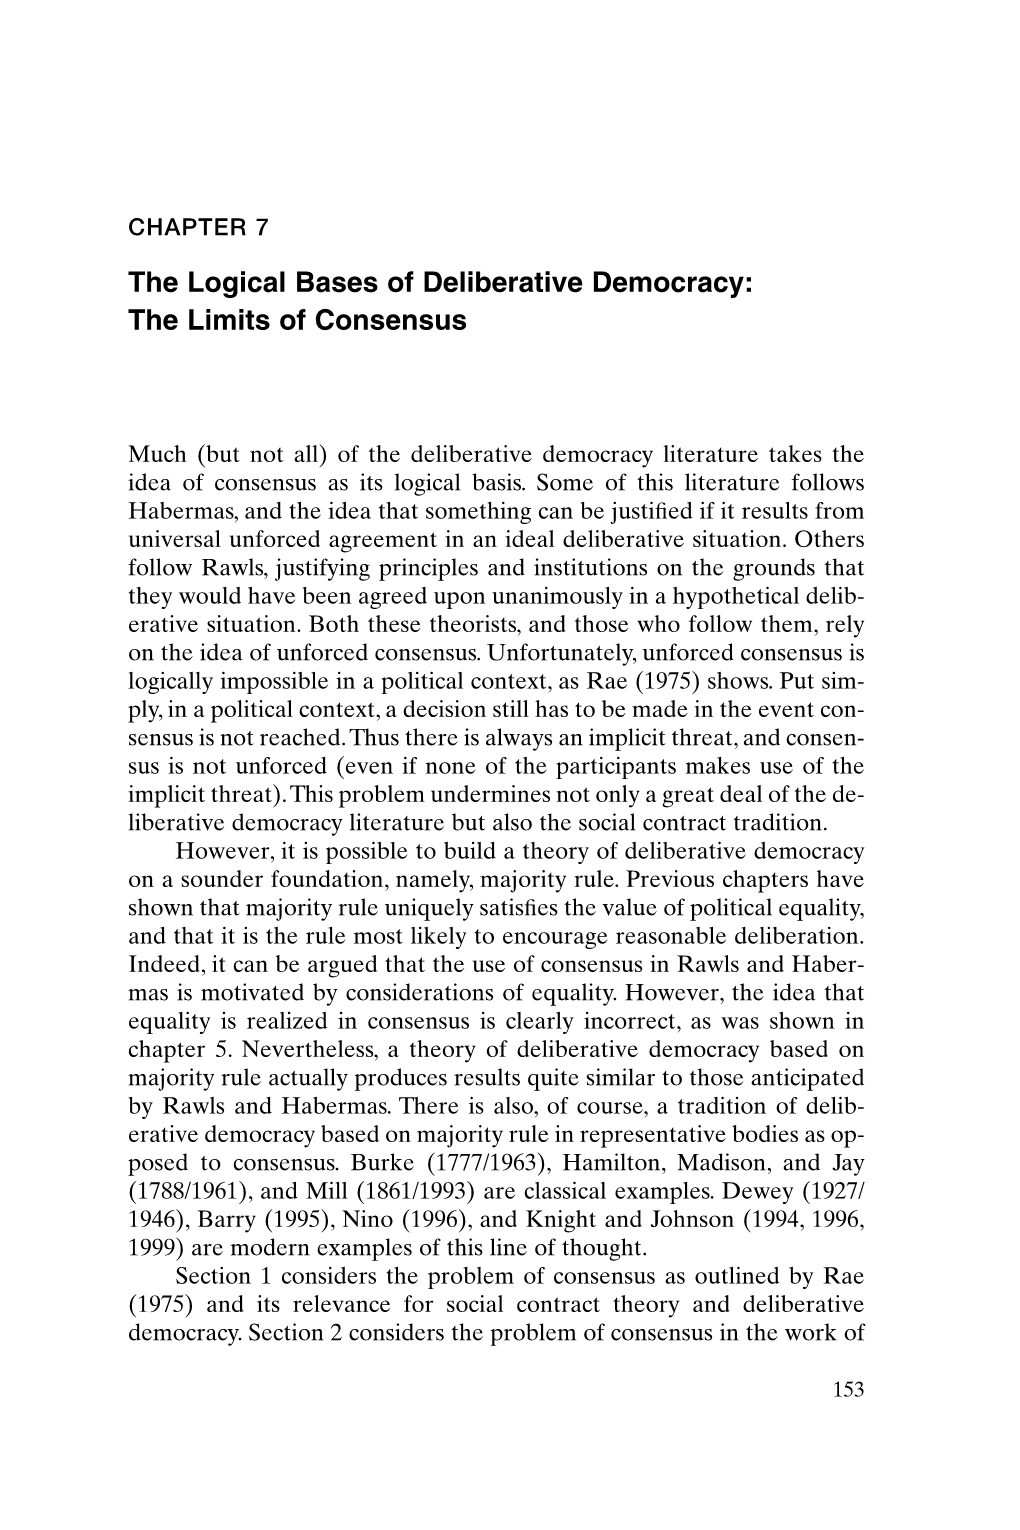 Chapter 7: the Logical Bases of Deliberative Democracy: the Limits of Consensus